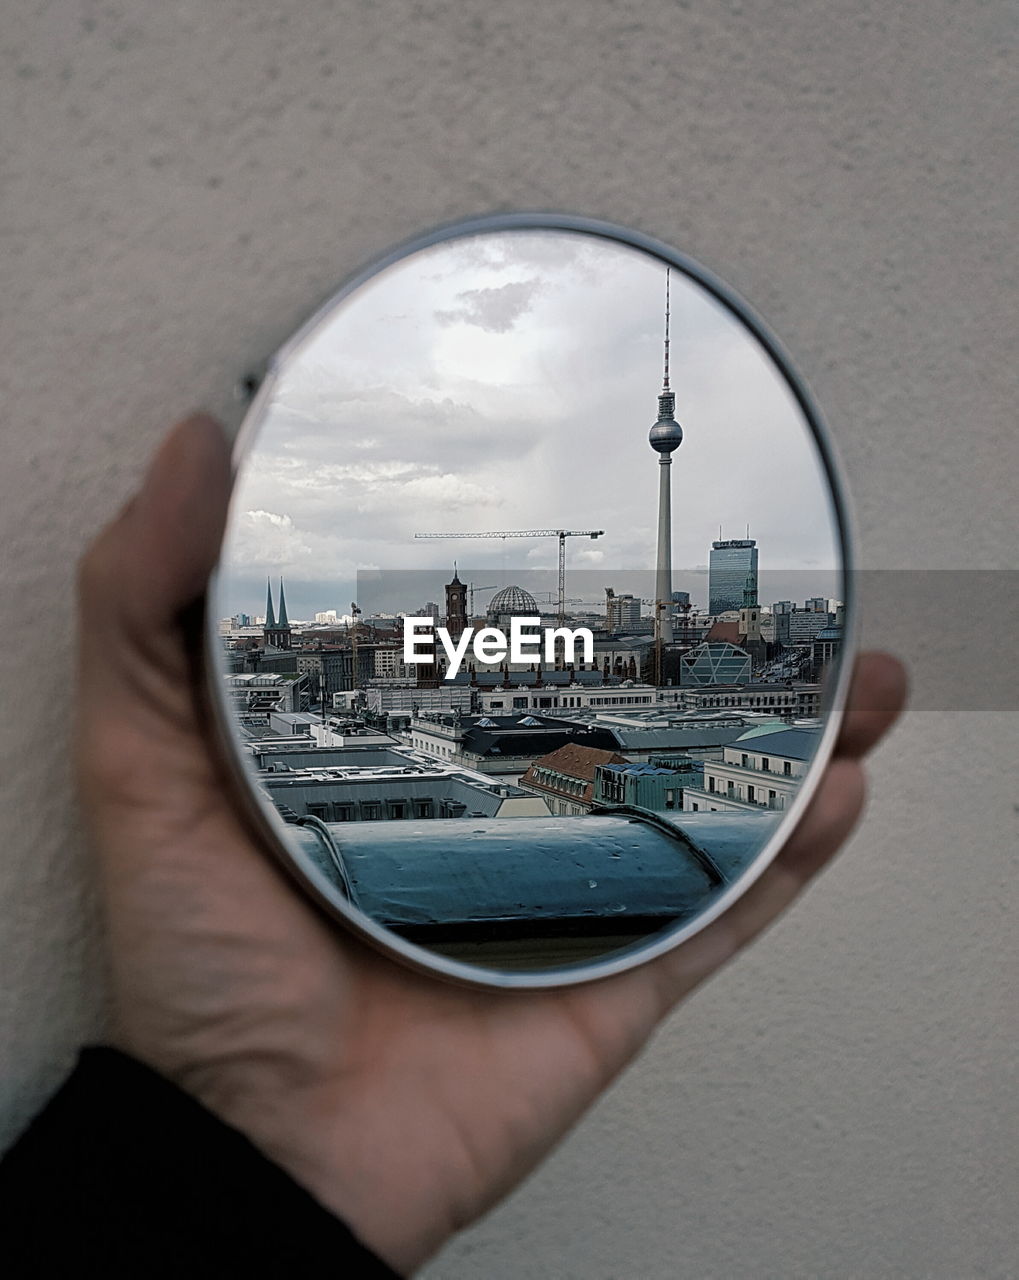 Cropped image on hand holding mirror with reflection of fernsehturm and cityscape